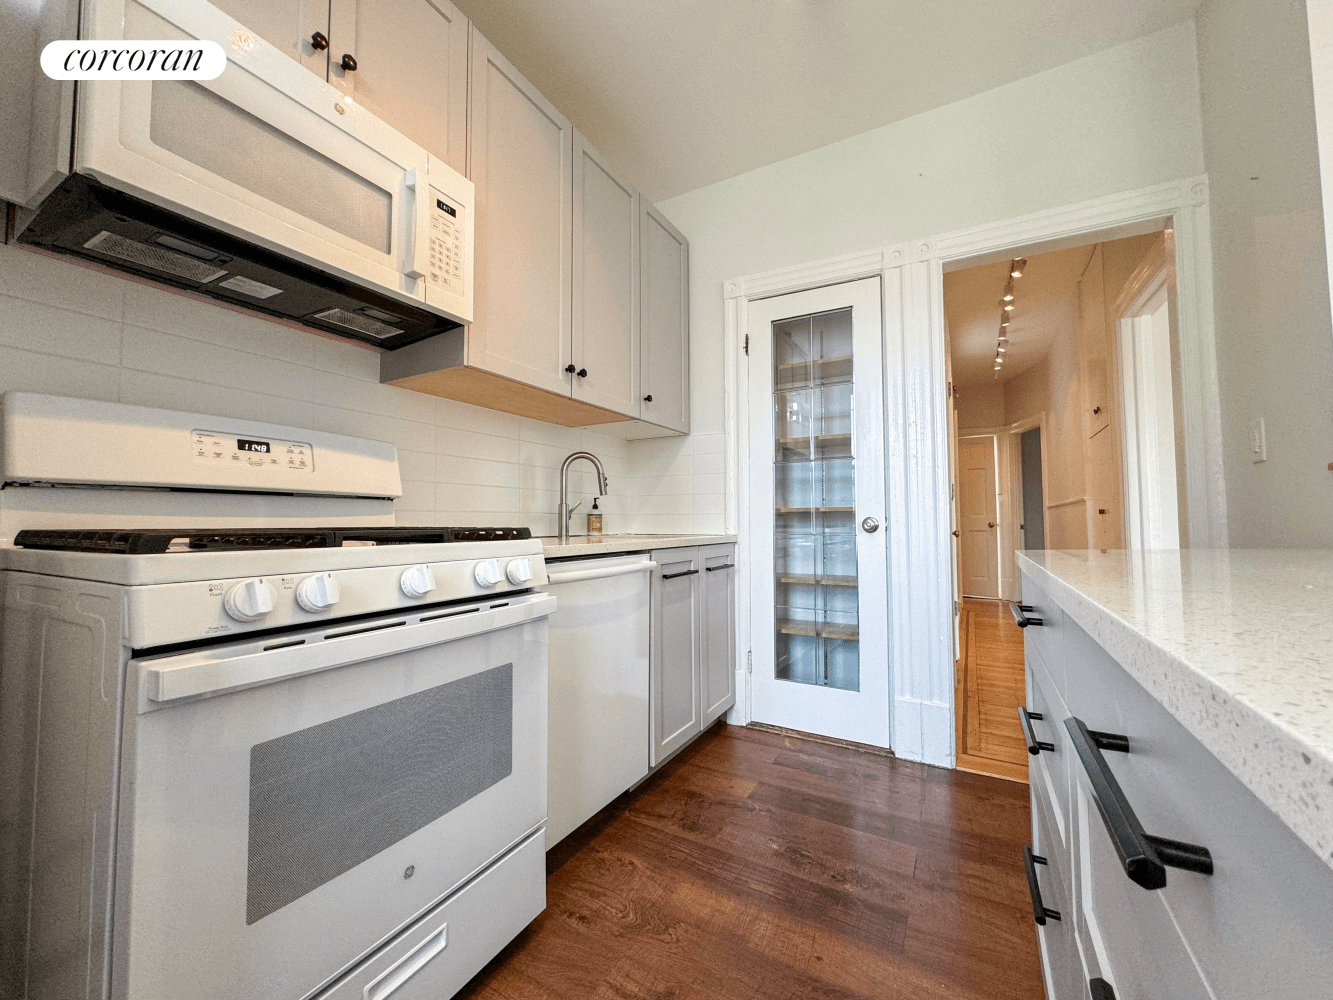 A stunning 2 bedroom, 1 bathroom home nestled on a beautiful tree lined street in the sought after neighborhood of Windsor Terrace, Brooklyn.